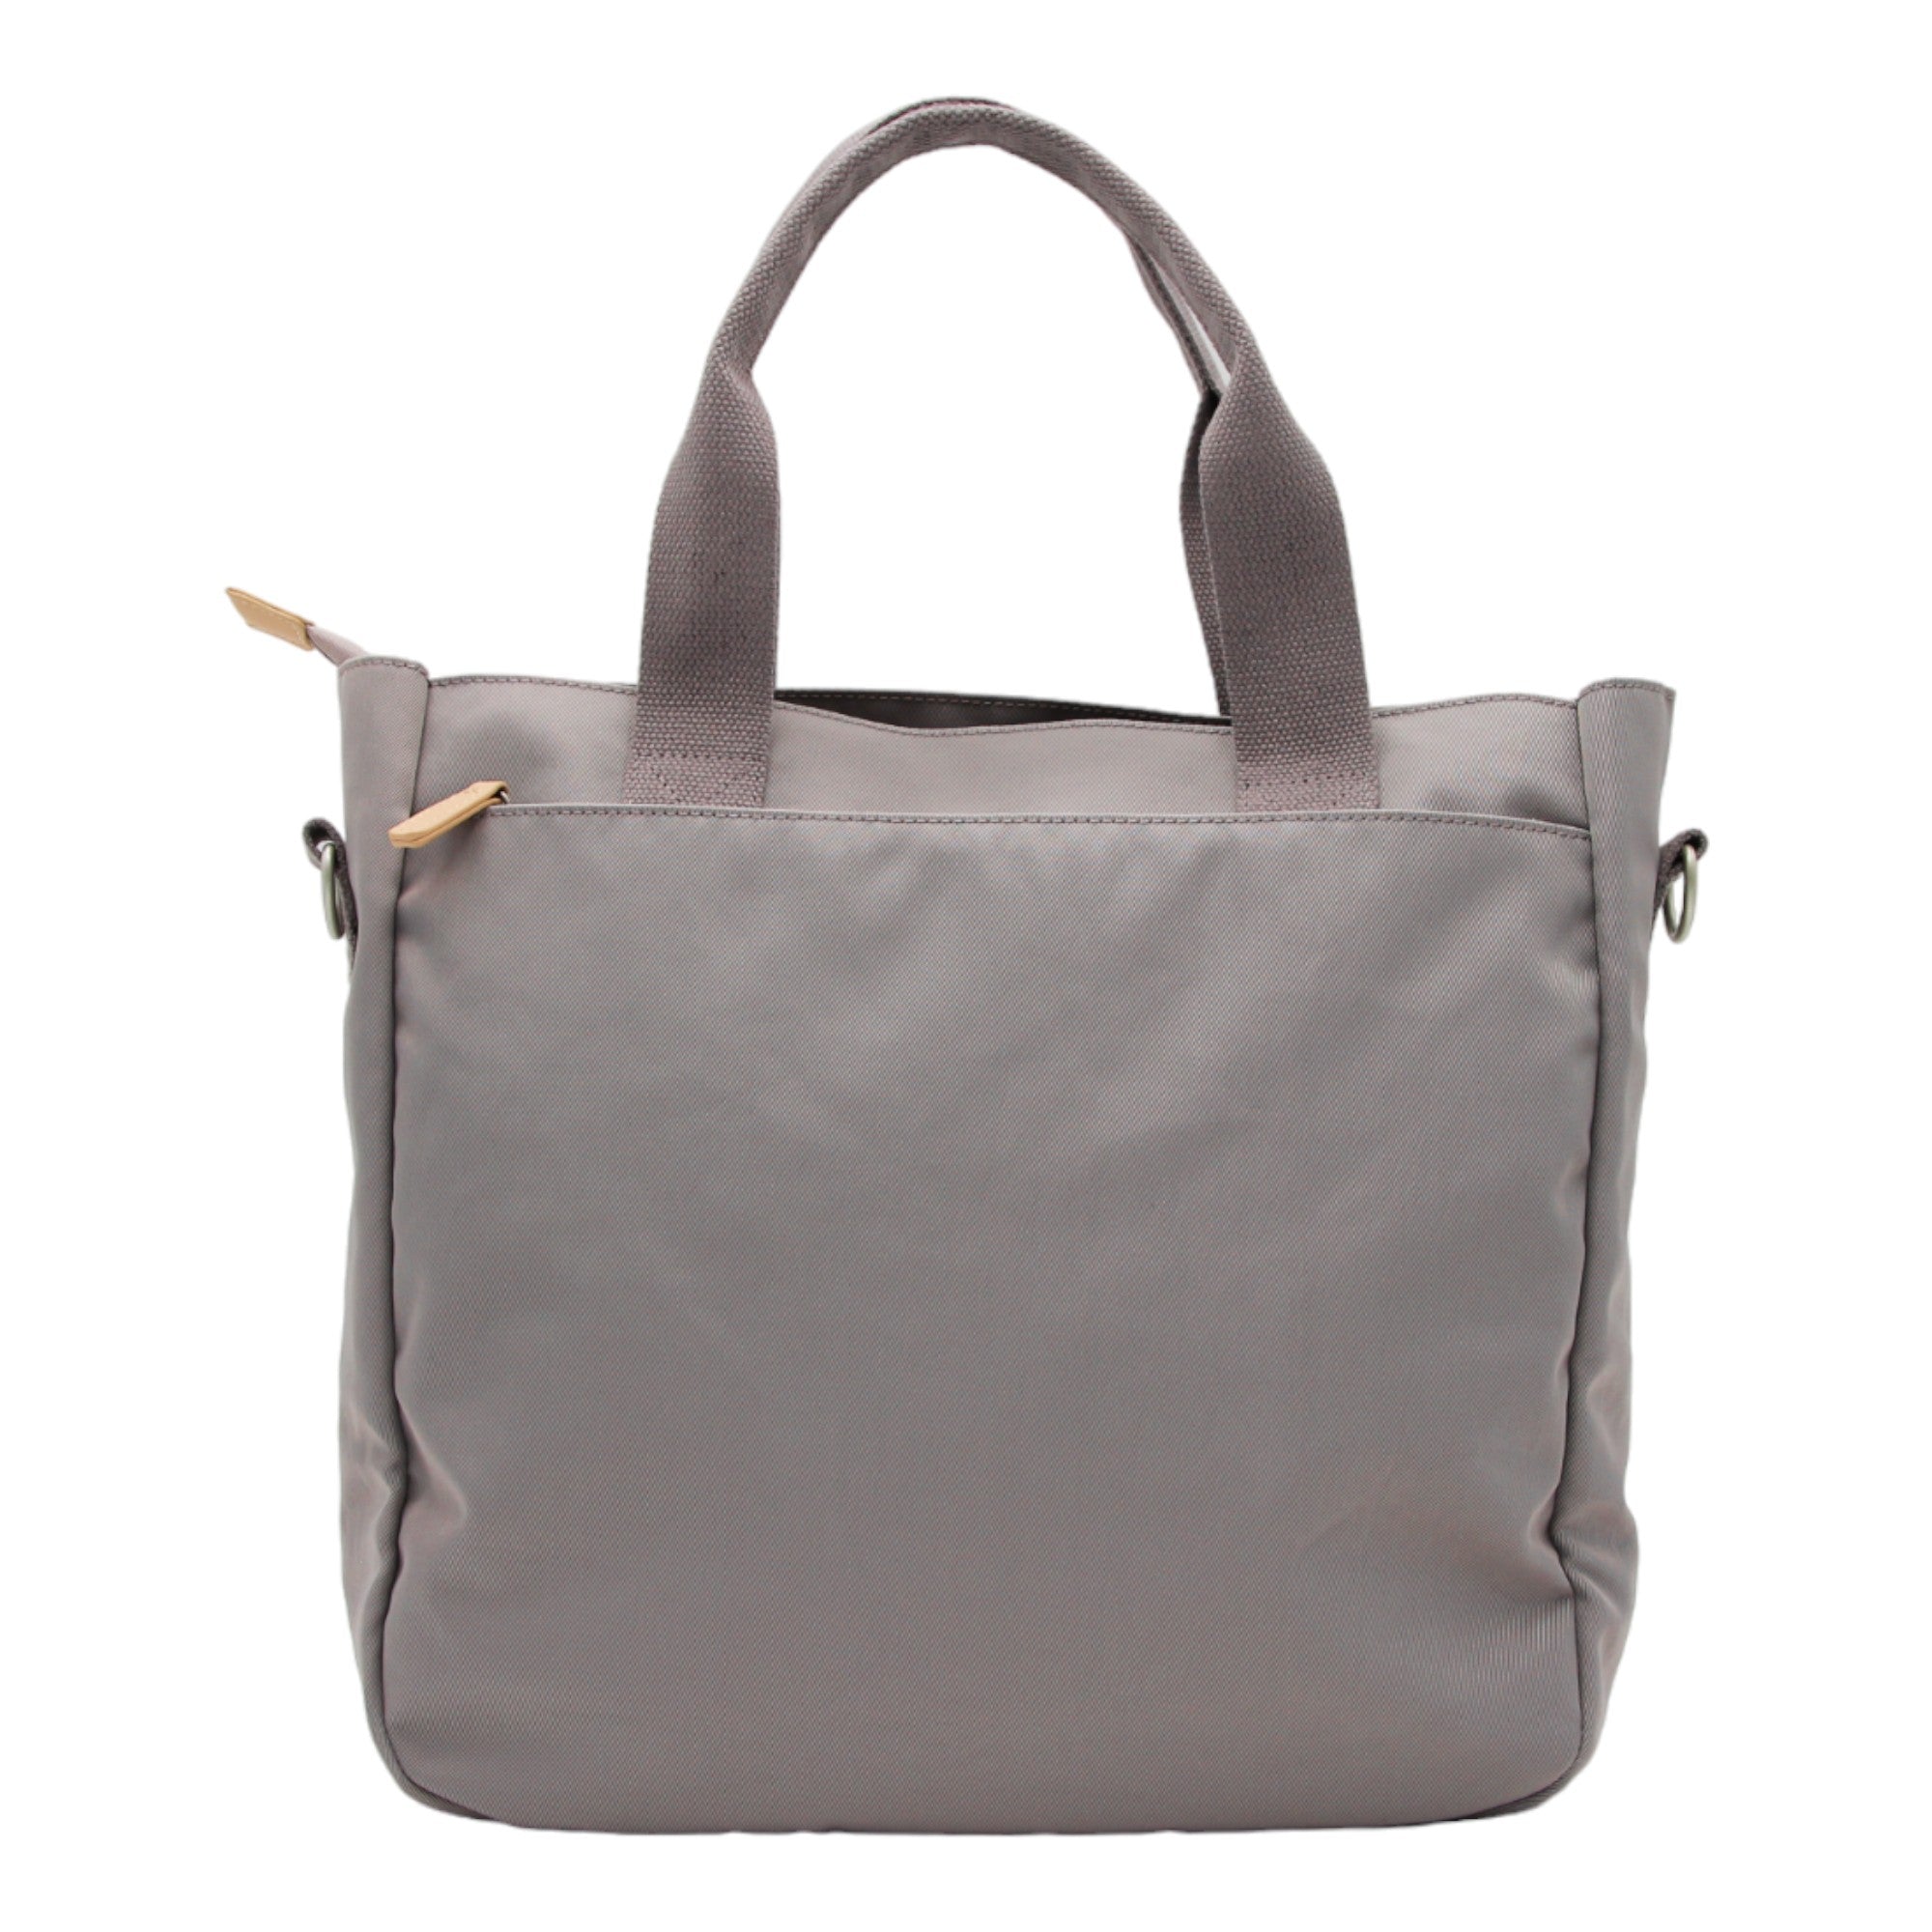 Covent Garden Tote Bag - Lilac